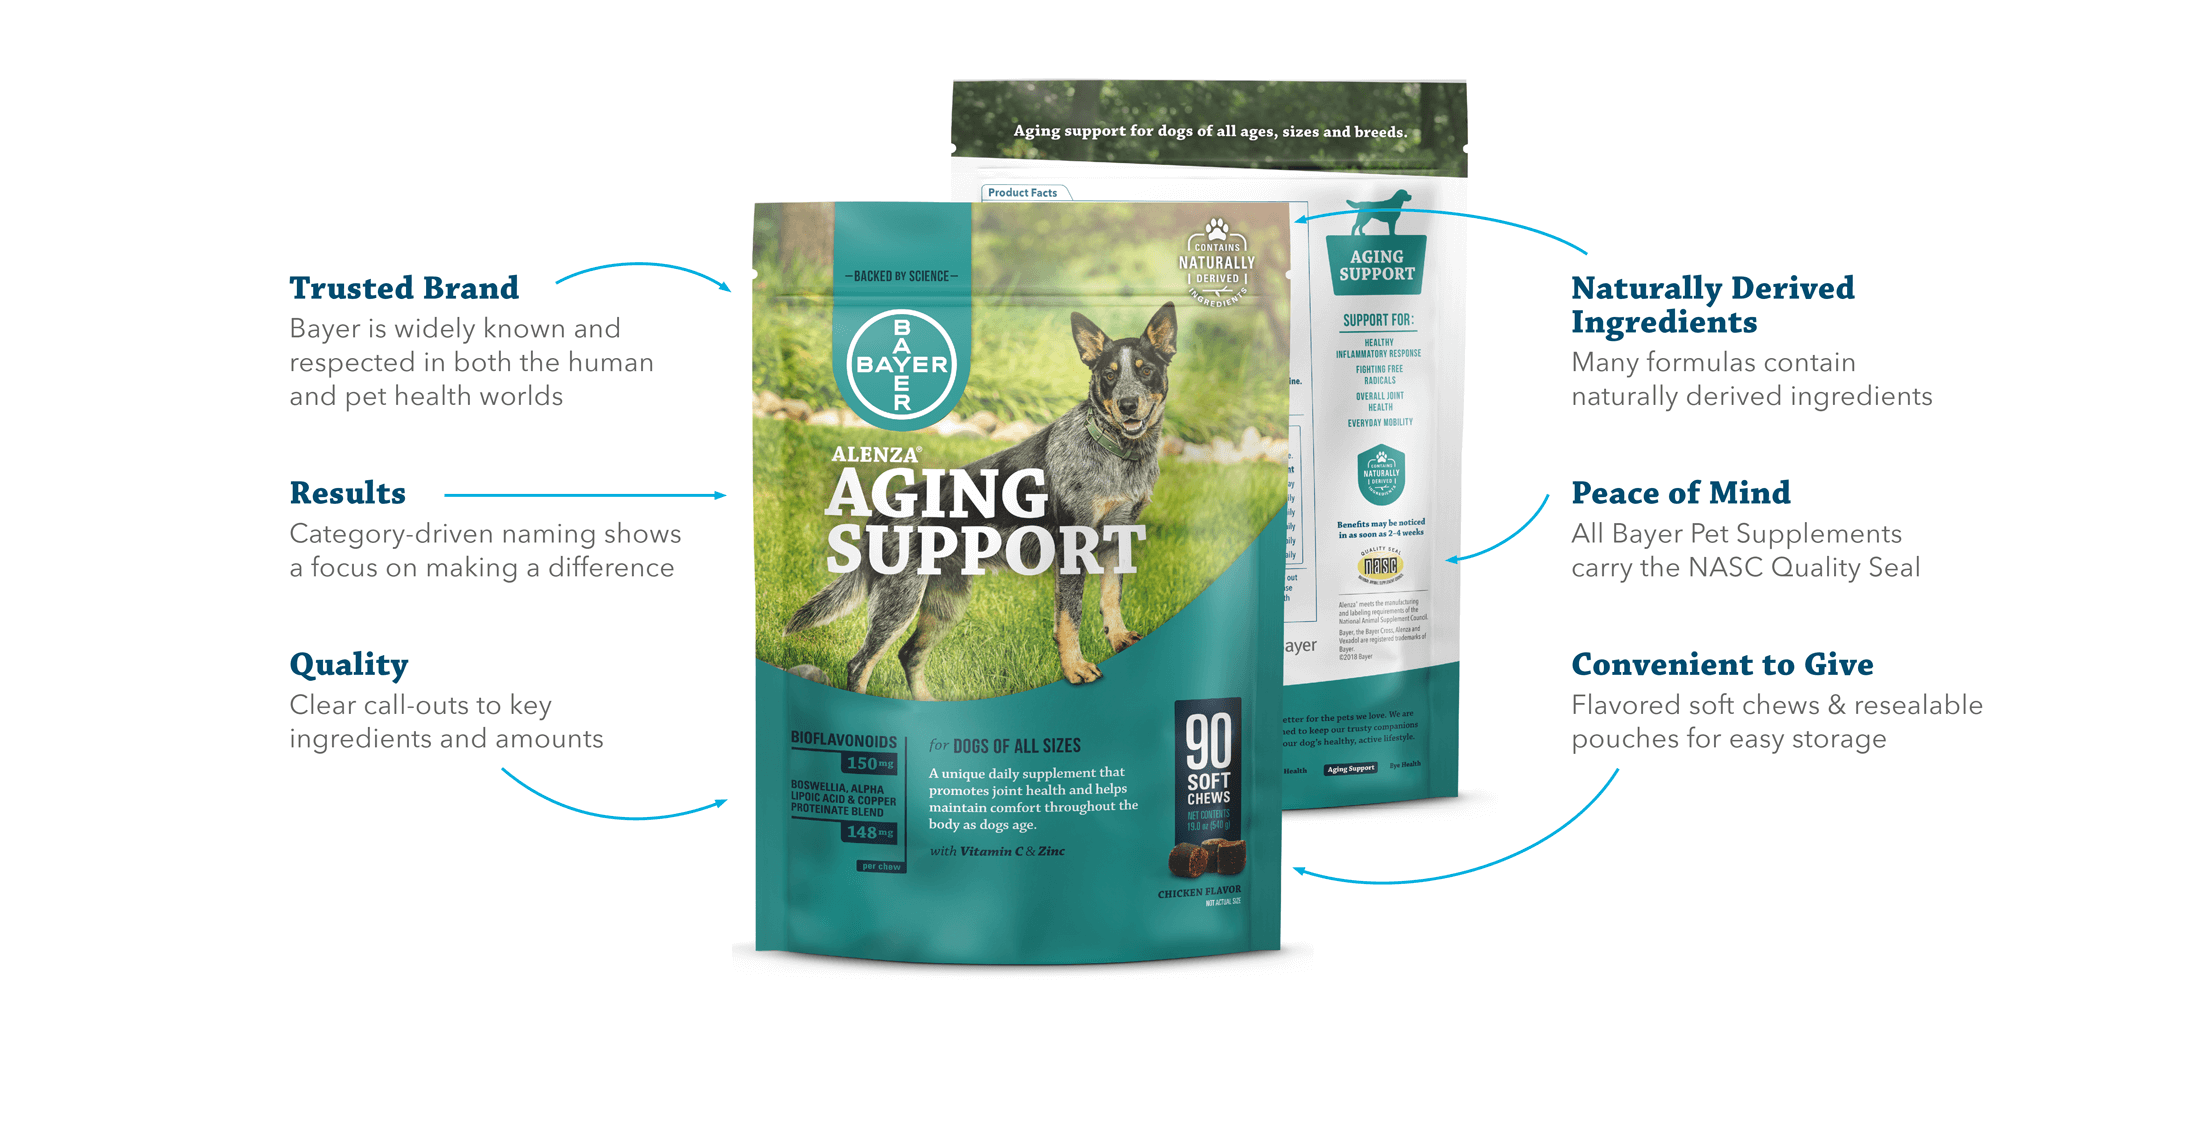 Front and back of Bayer Nutritional Supplement bag with areas highlighting Quality, Results, Trusted Brand, Convenience, Naturally-derived Ingredients and Peace of Mind